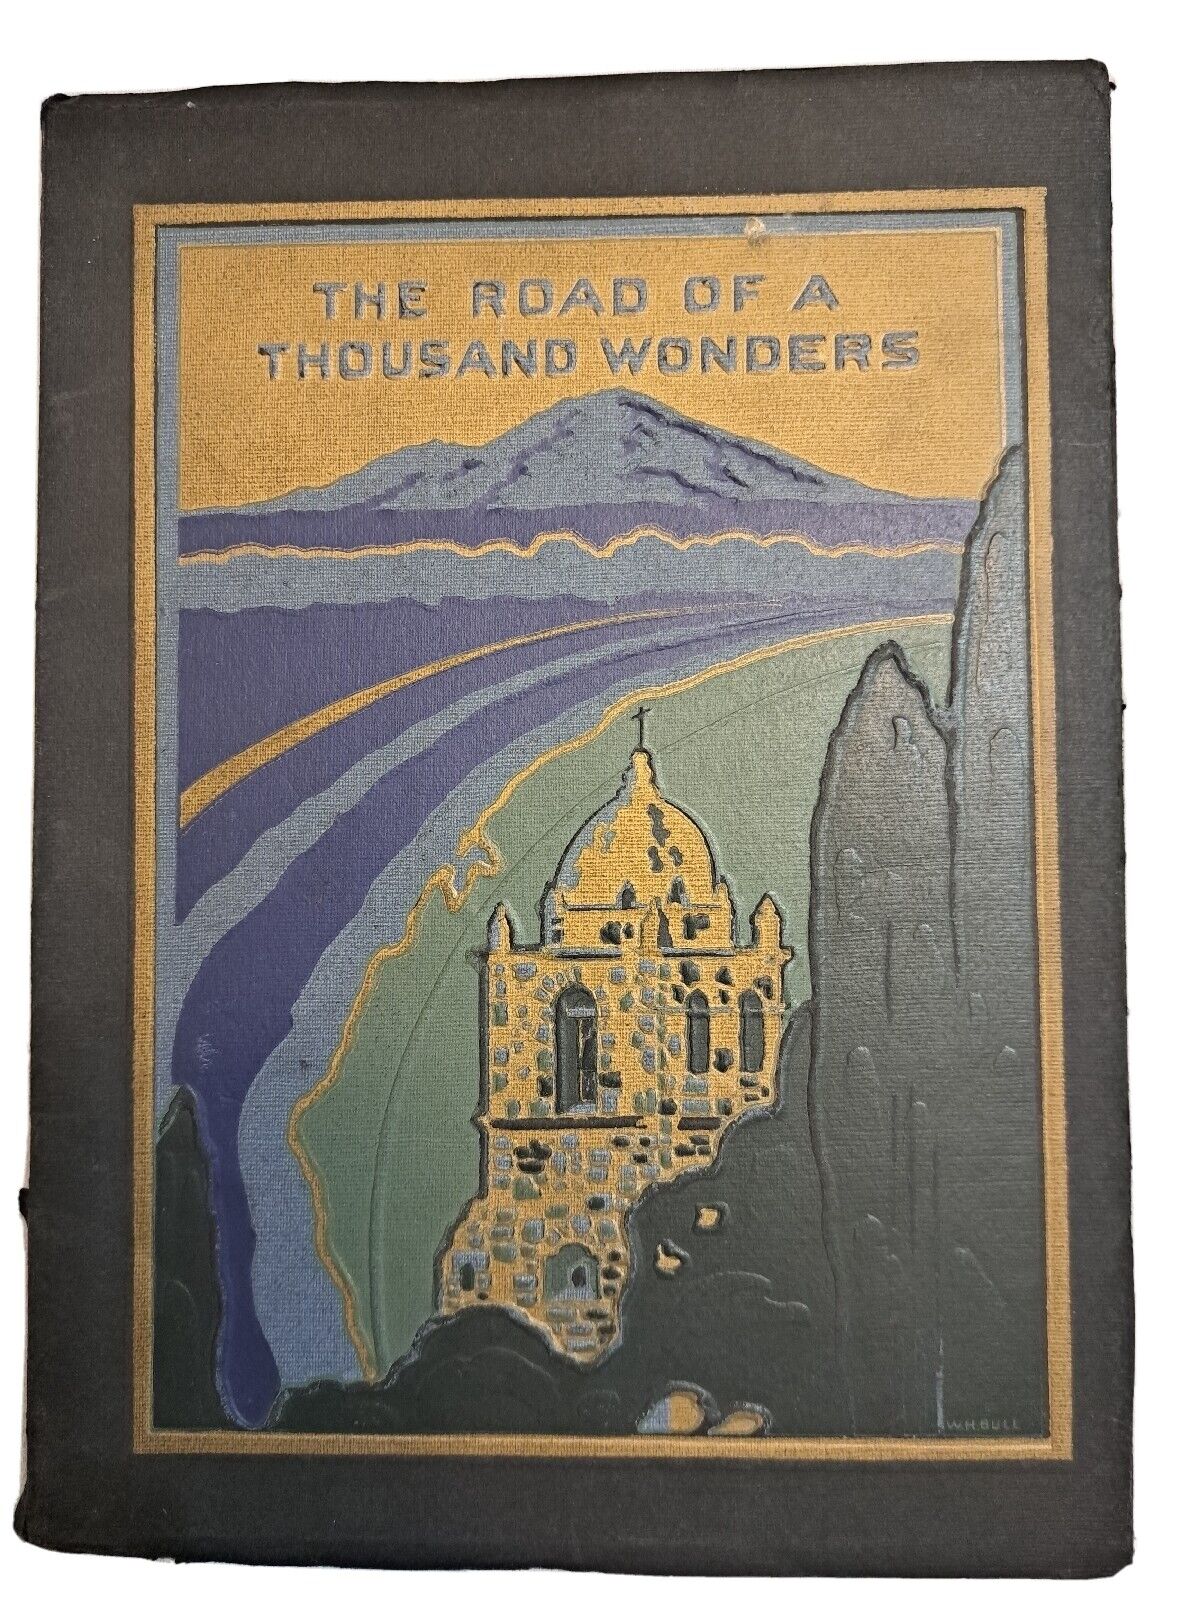 Antique Copy 'Road of a Thousand Wonders : The Coast Line' - Shasta Route 1908 